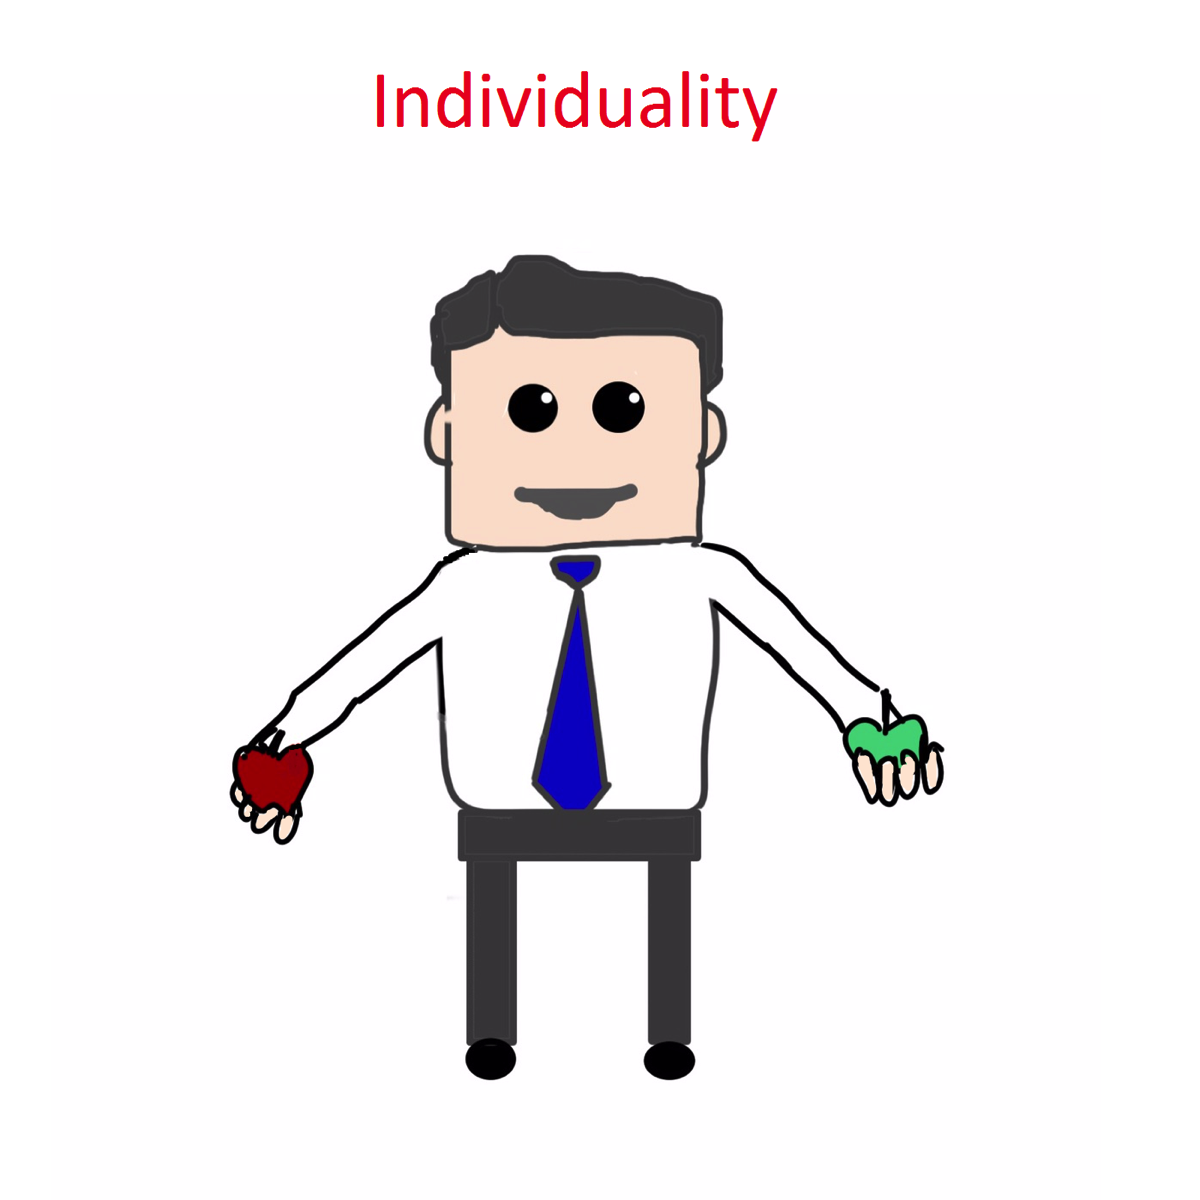 Individuality and personalisation